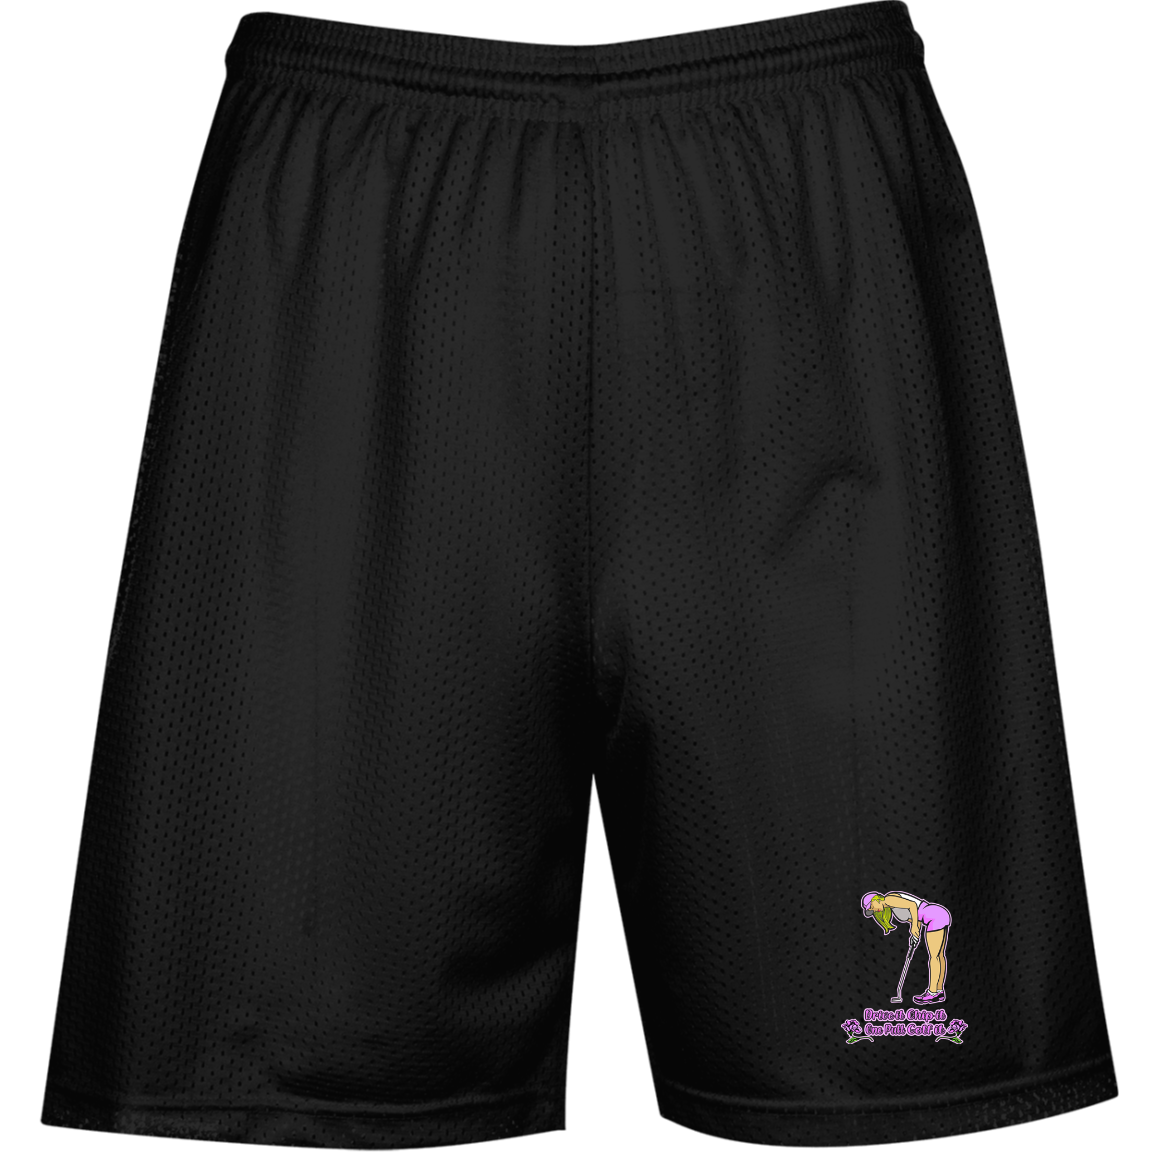 OPG Custom Design #13. Drive it. Chip it. One Putt Golf it. Double layer 100% Polyester Mesh Performance Mesh Shorts